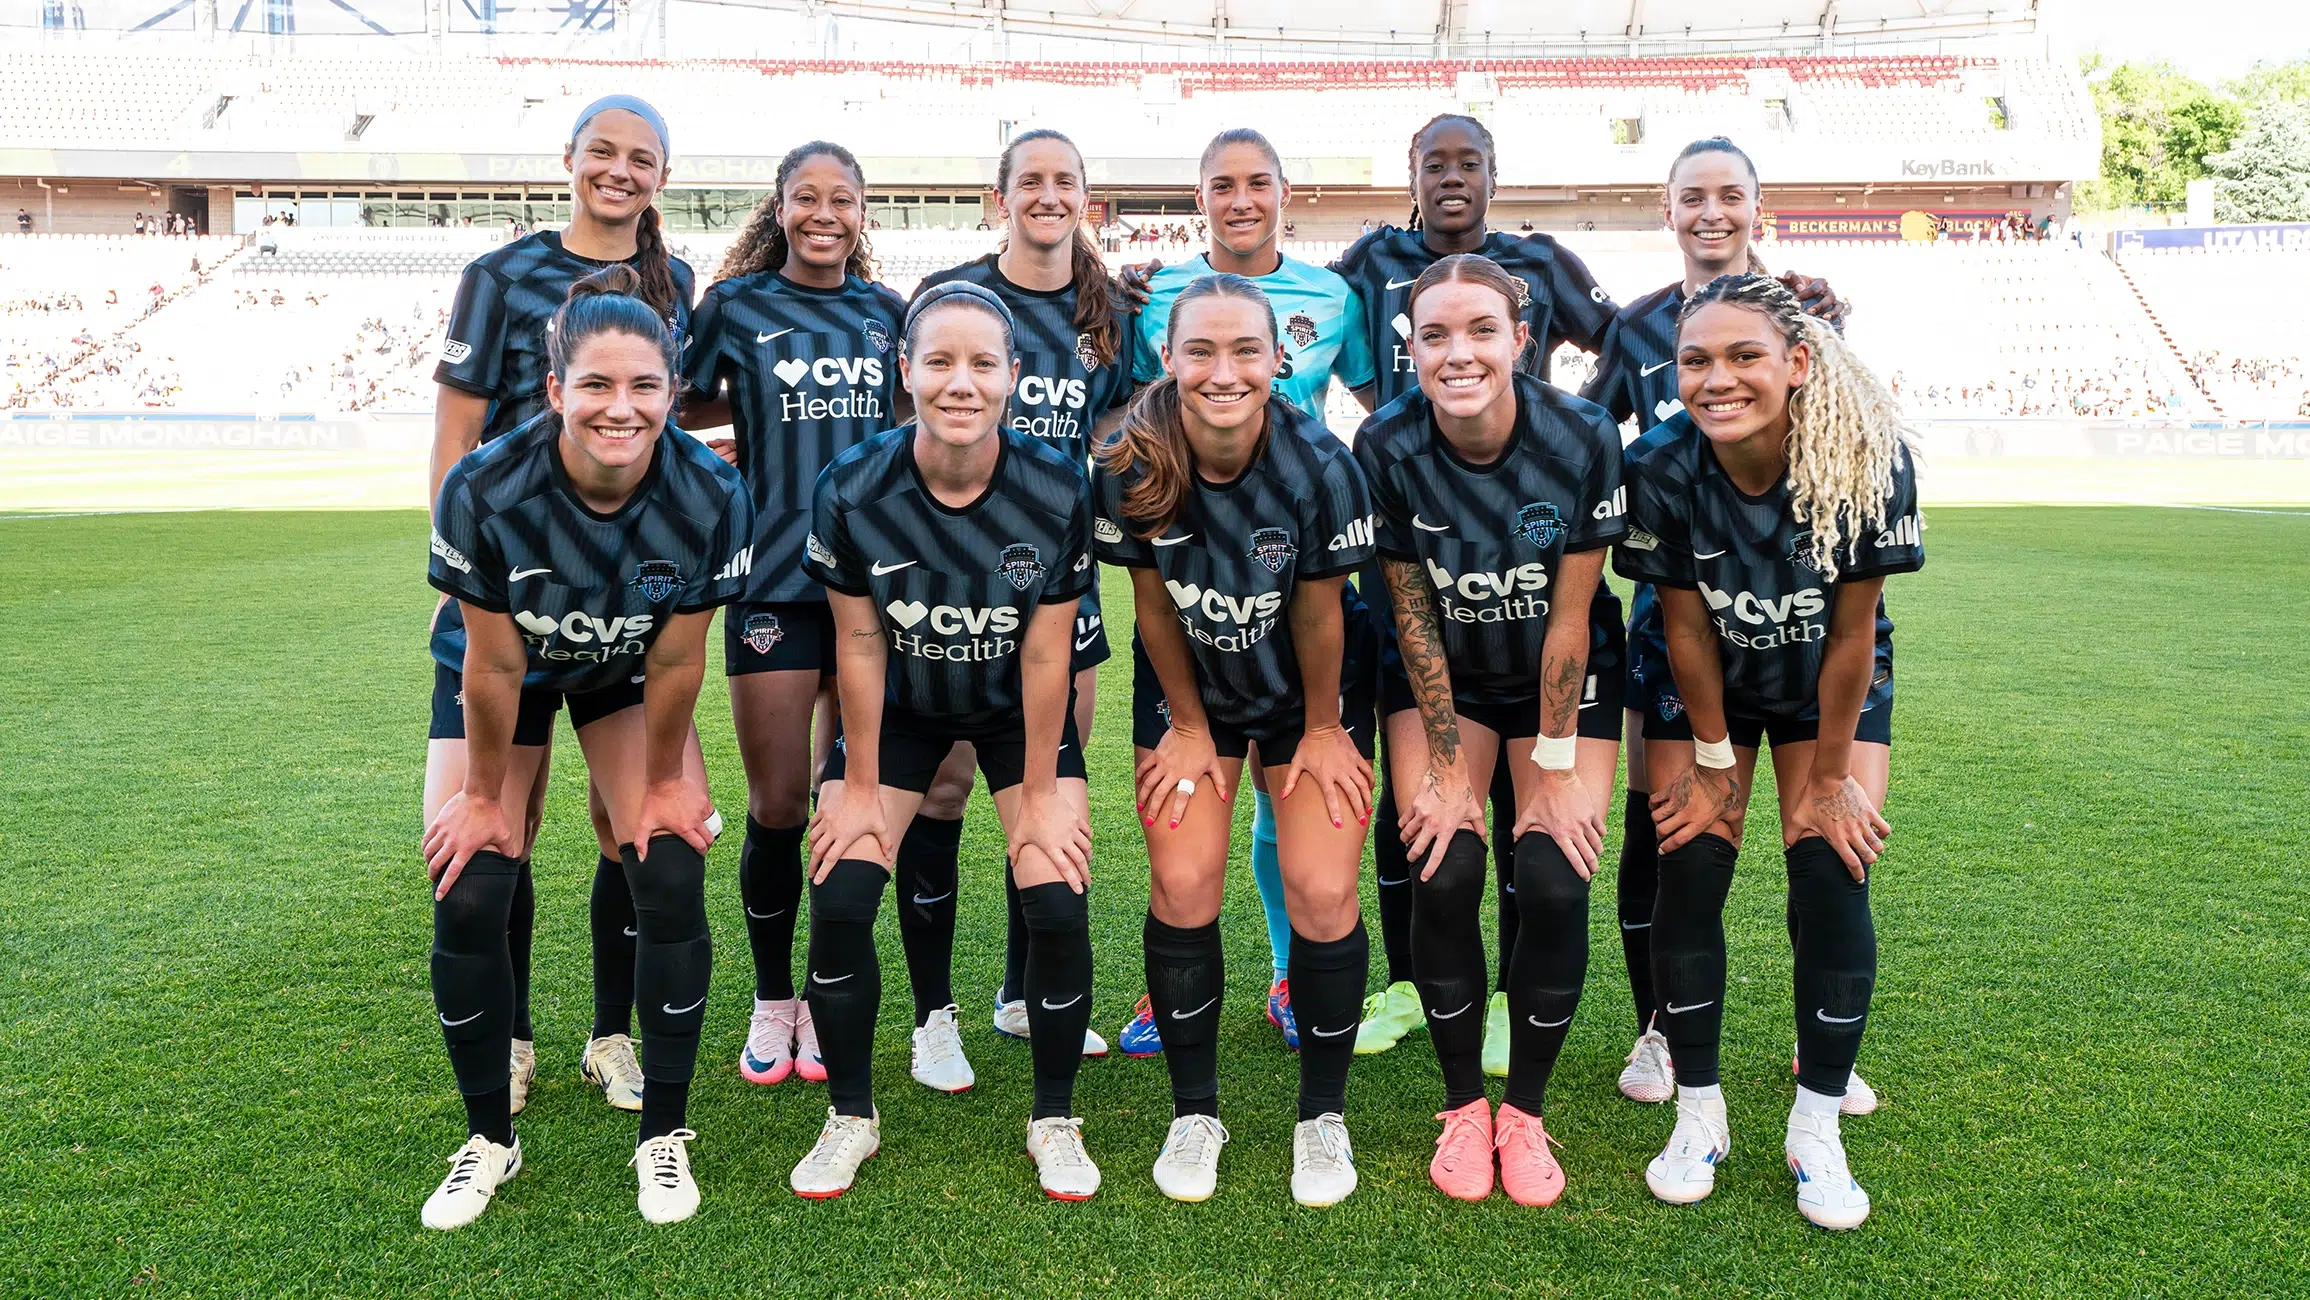 The starting 11 for the Washington Spirit pose in two rows.